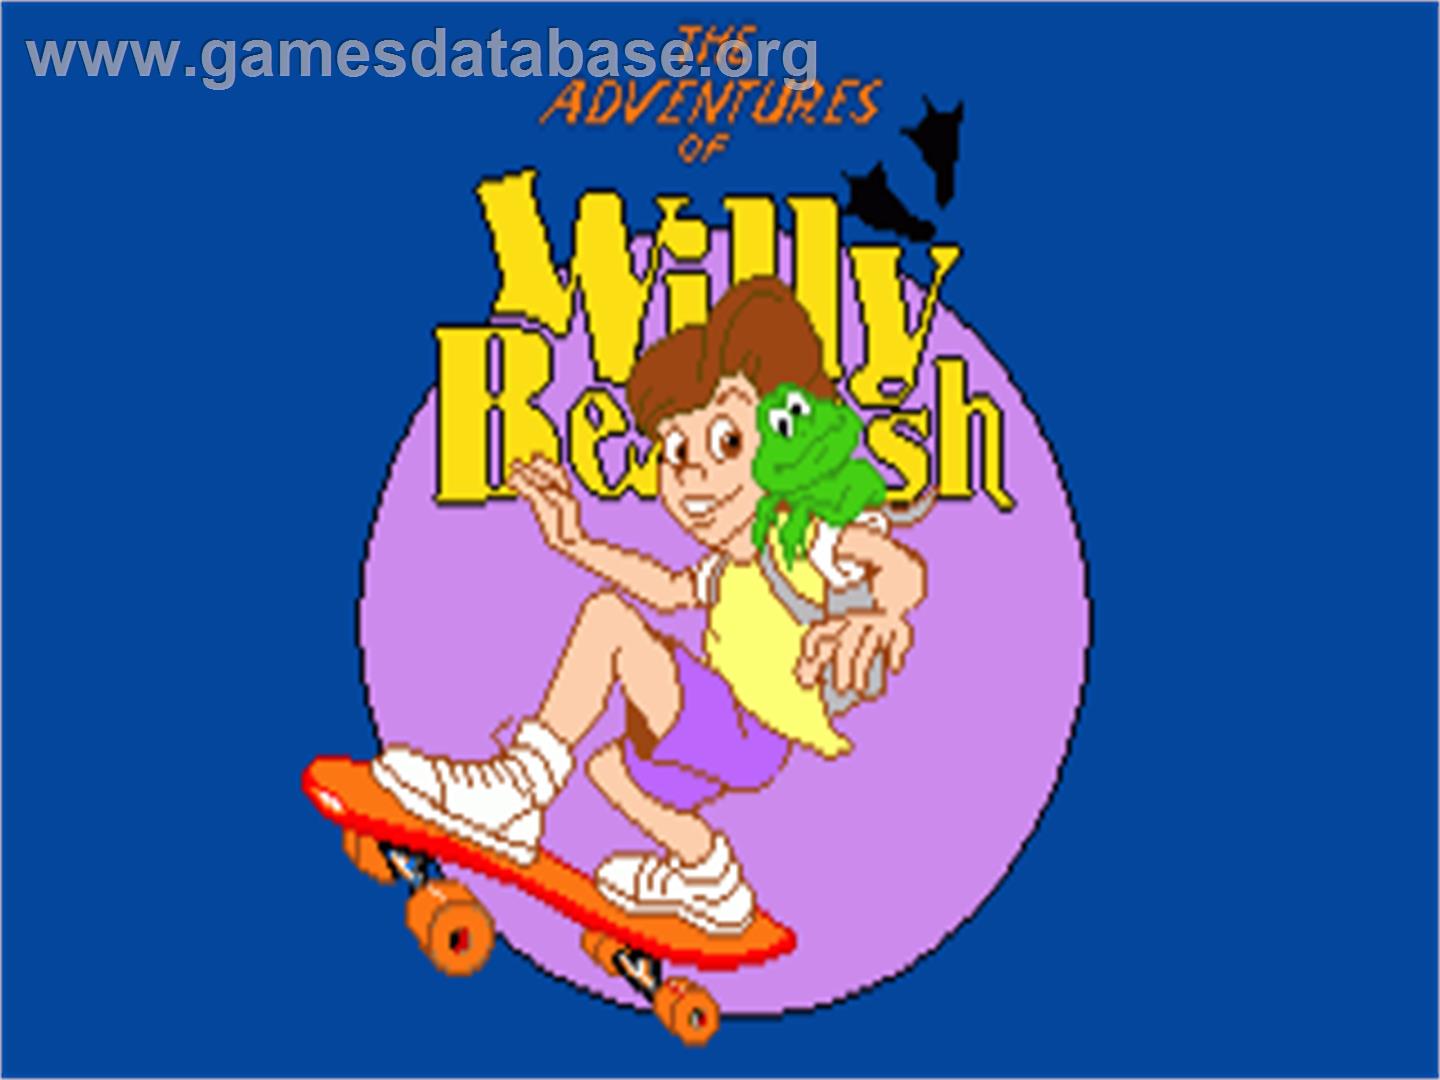 Adventures of Willy Beamish - Commodore Amiga - Artwork - Title Screen